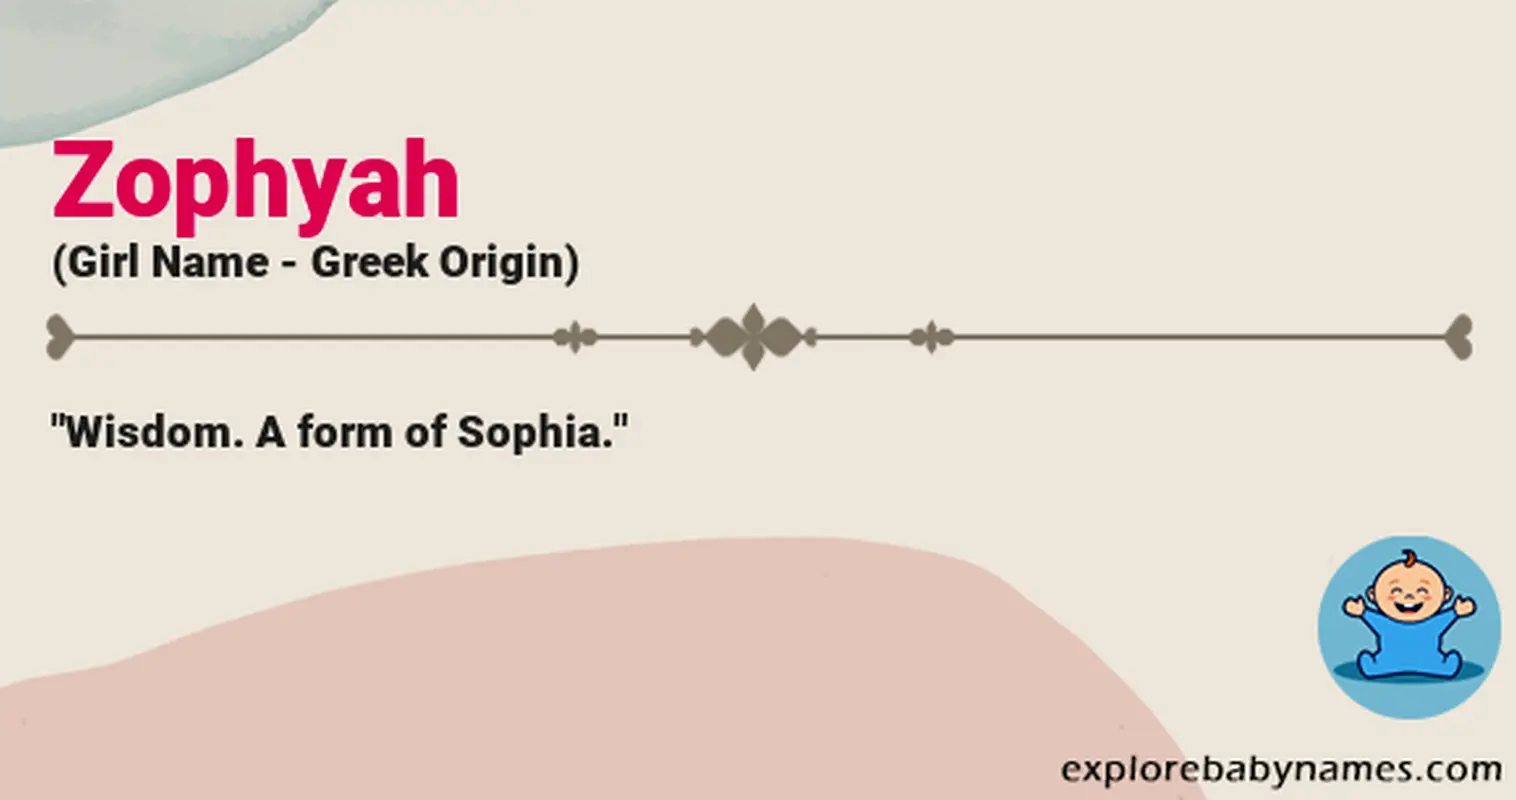 Meaning of Zophyah